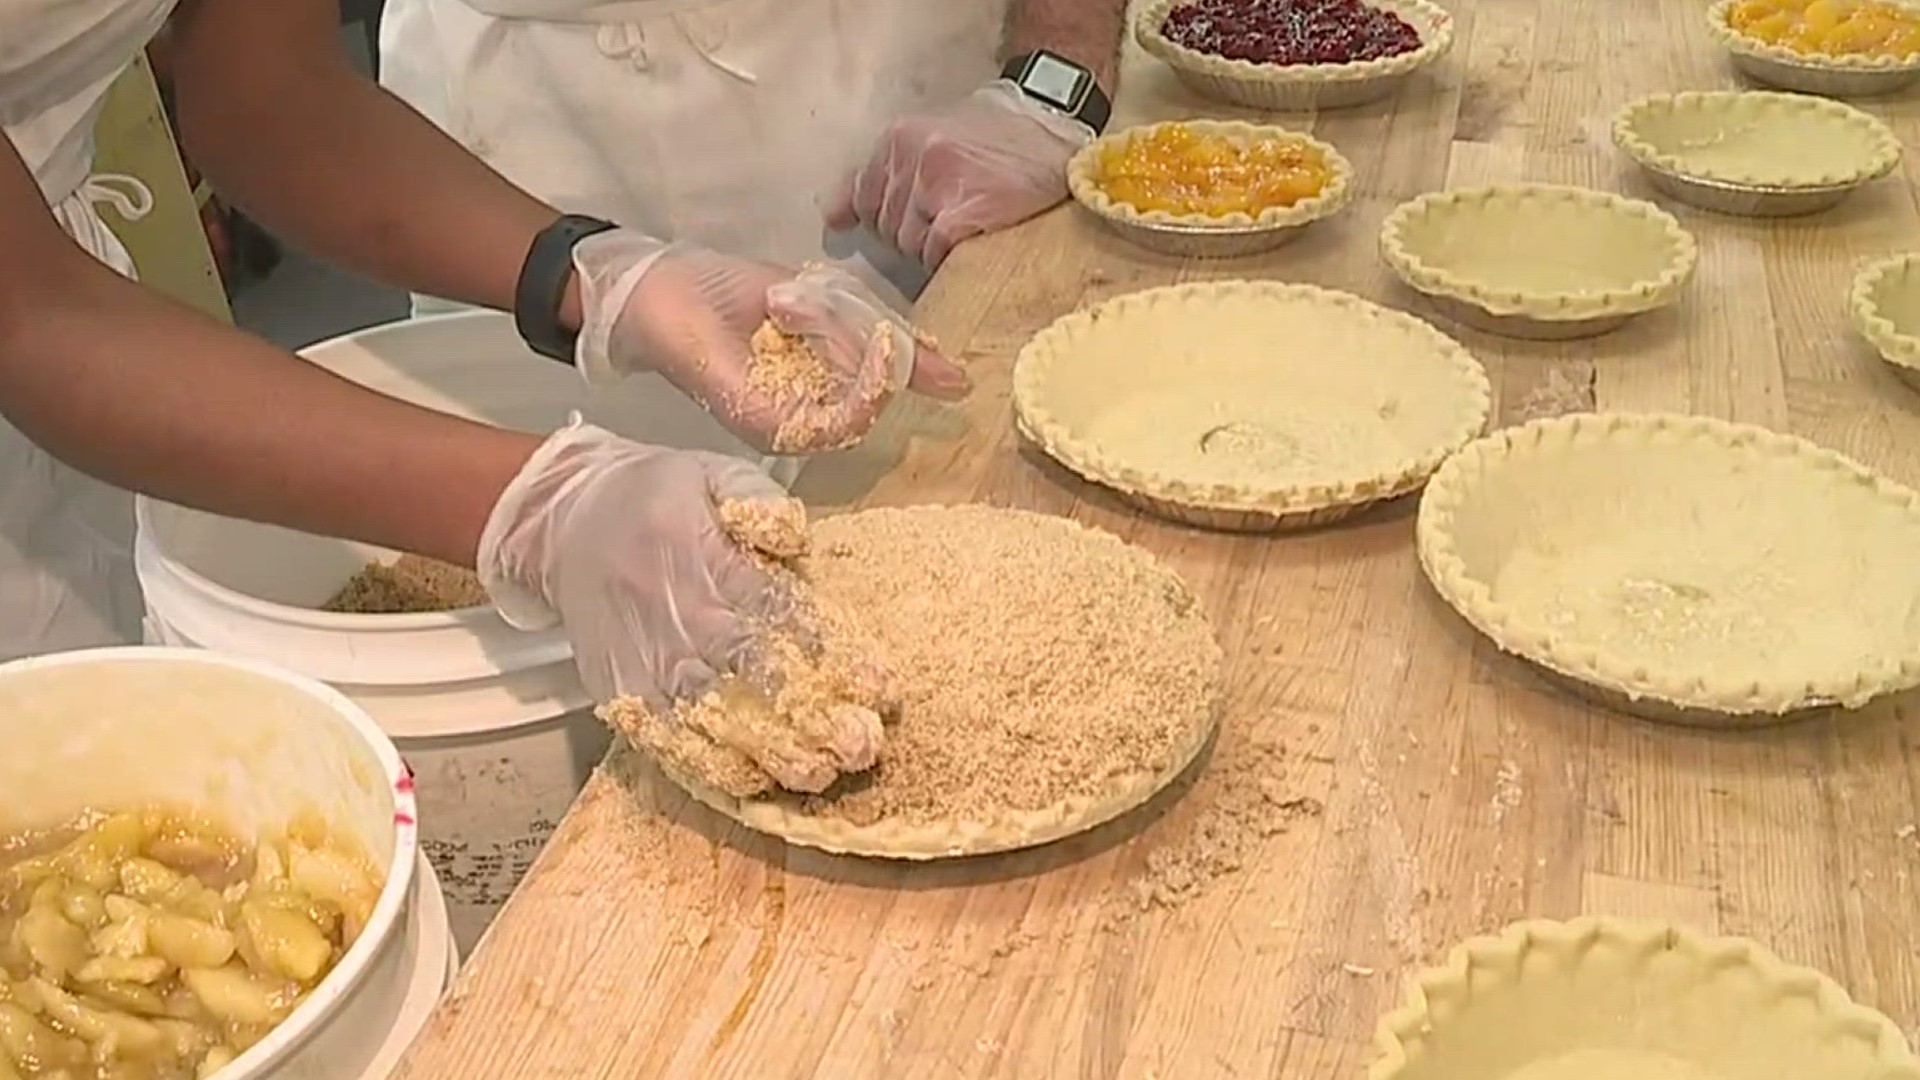 Pi Day is about more than just the number 3.14 and it’s not only for math enthusiasts. Local businesses are getting in on all the fun by getting creative for Pi Day.